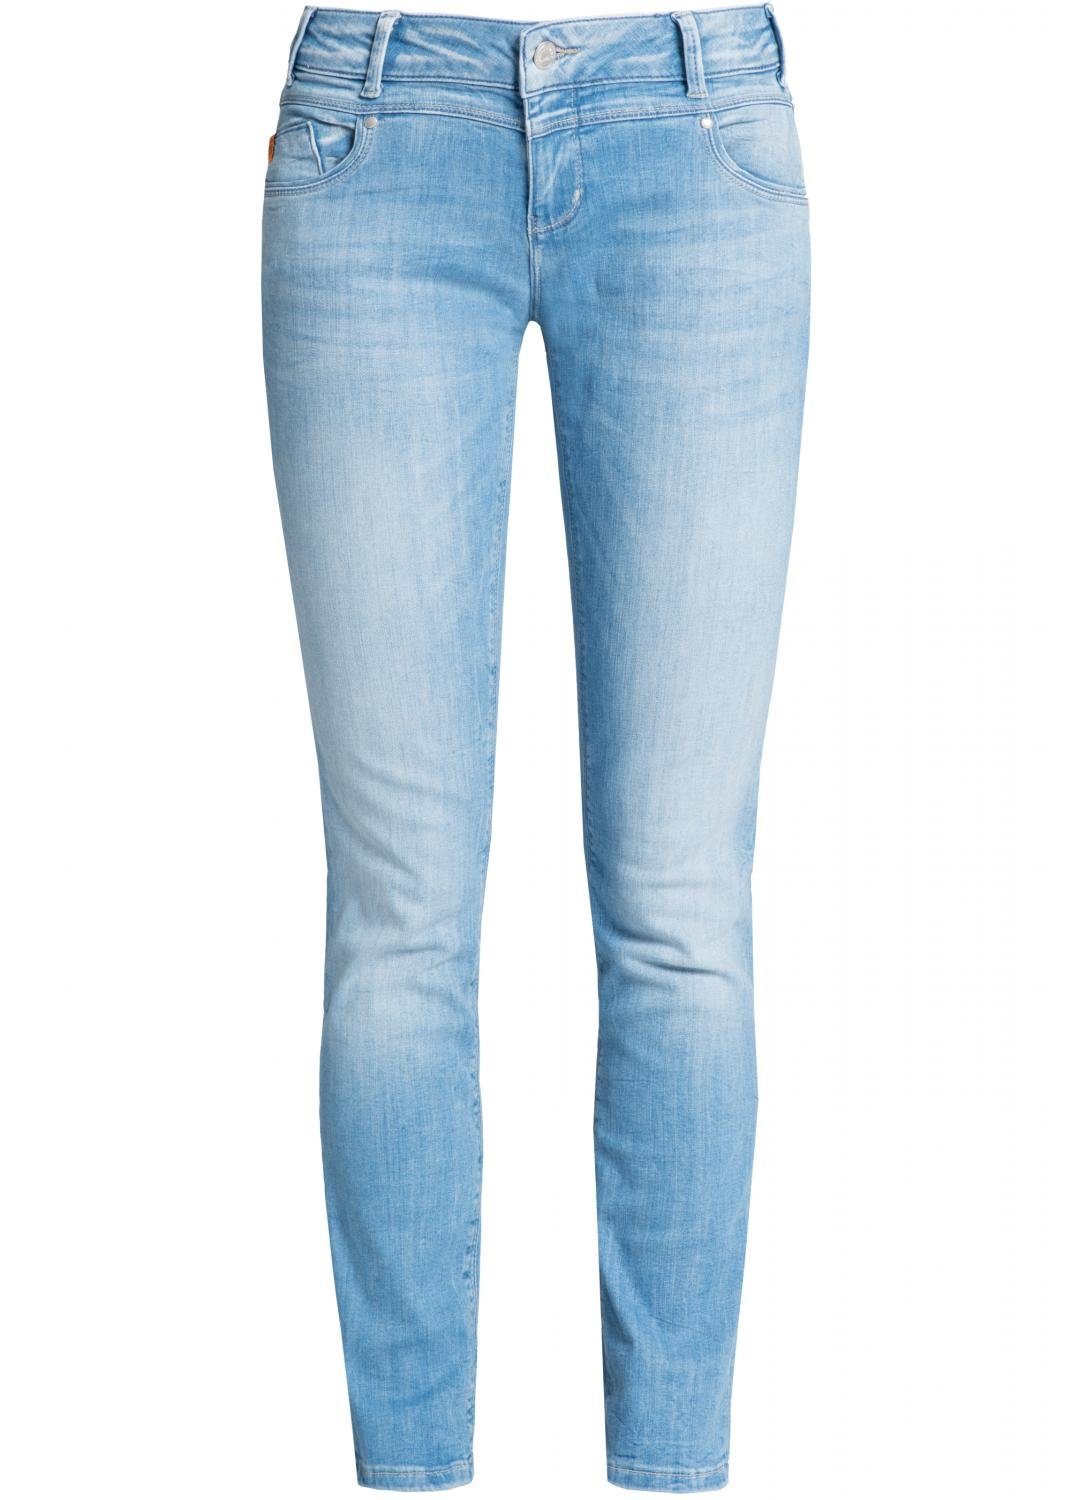 blue MOD JEANS Miracle REA cairo Denim of Stretch-Jeans NOS SP19-2012.2308